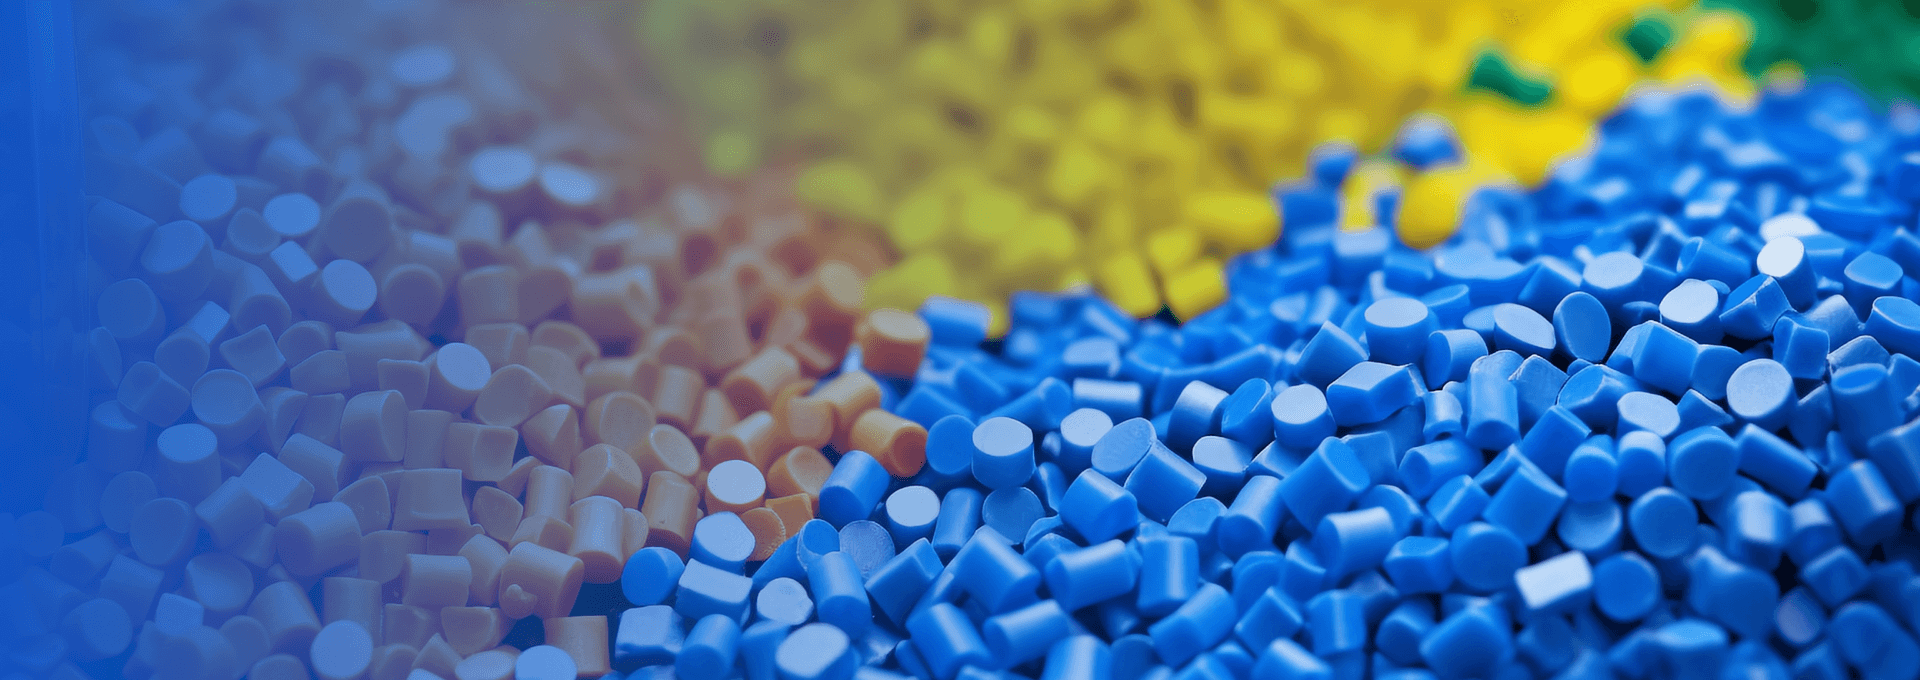 Engineering Plastic Compounds